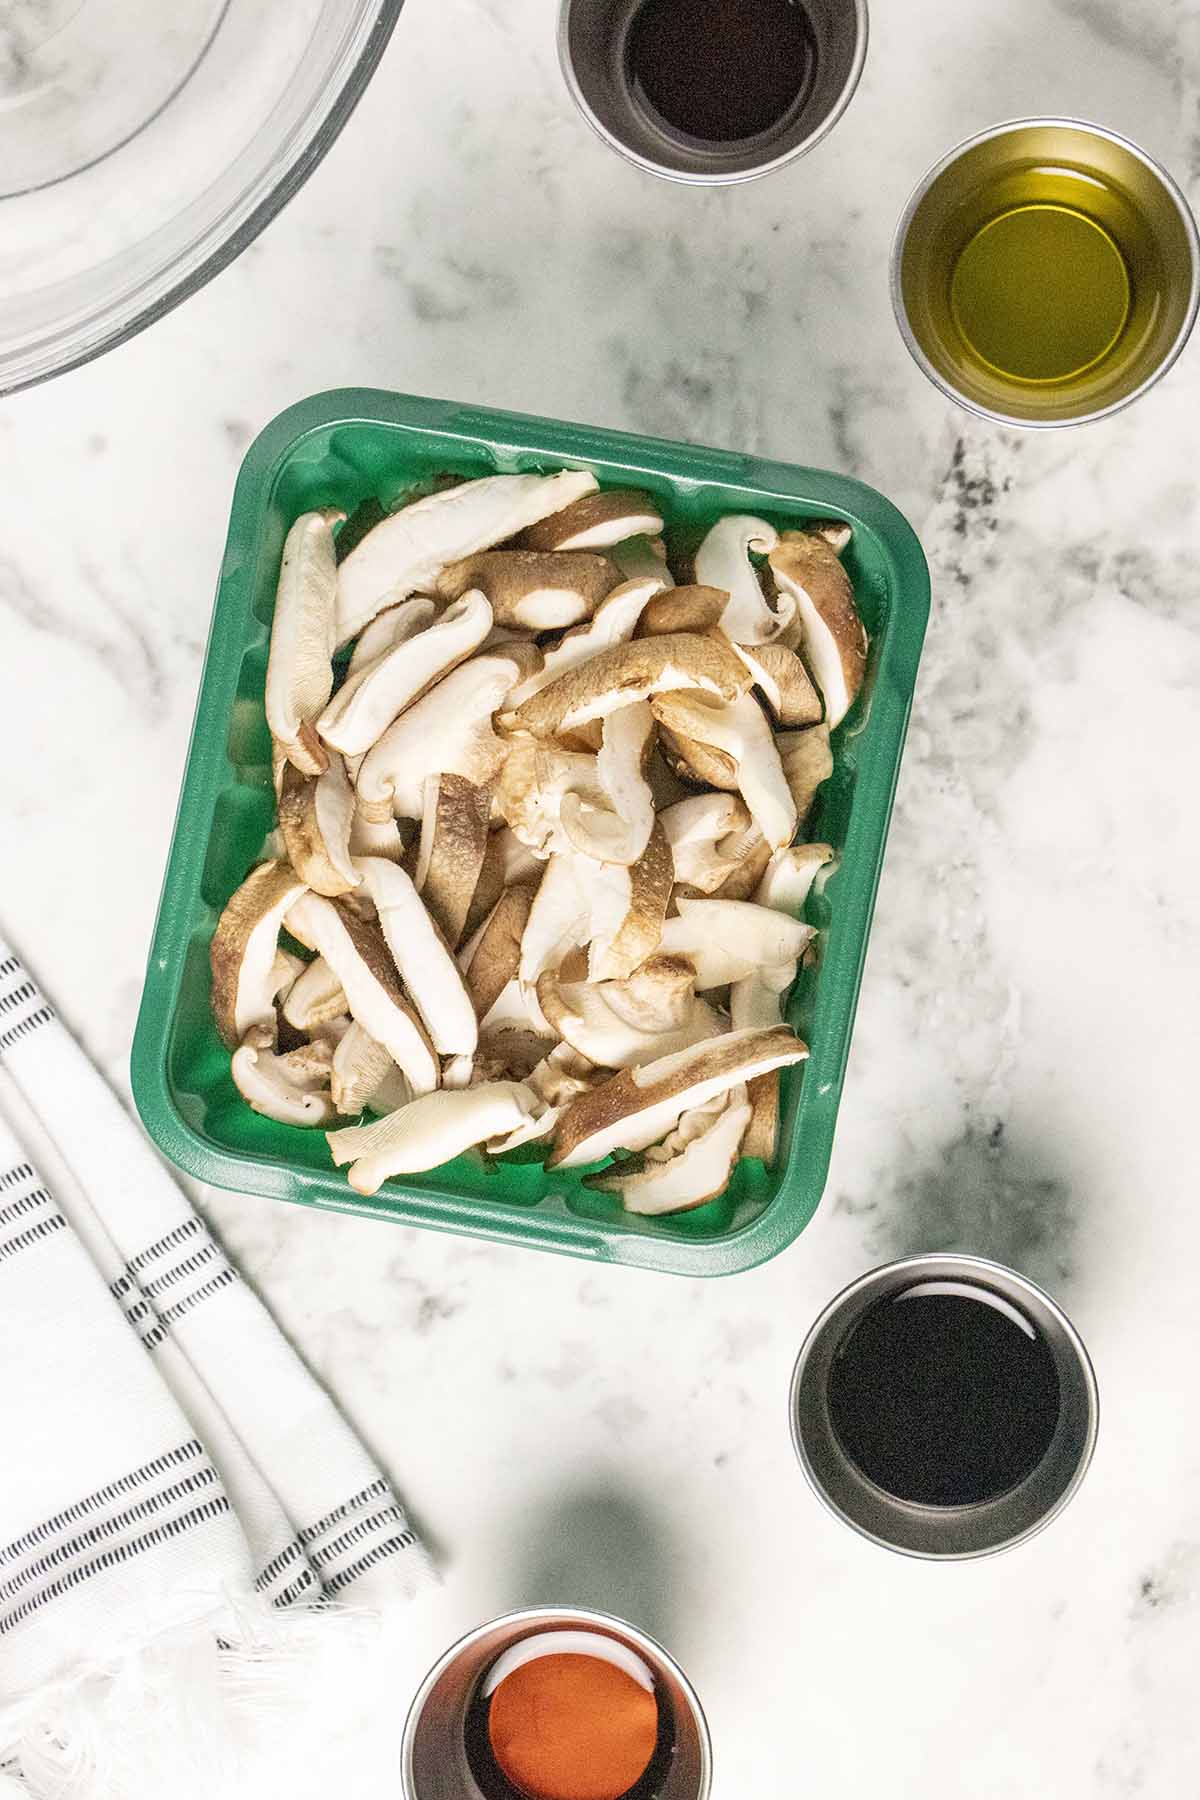 shiitake mushrooms in a green container on a marble table surrounded by cups of liquid ingredients